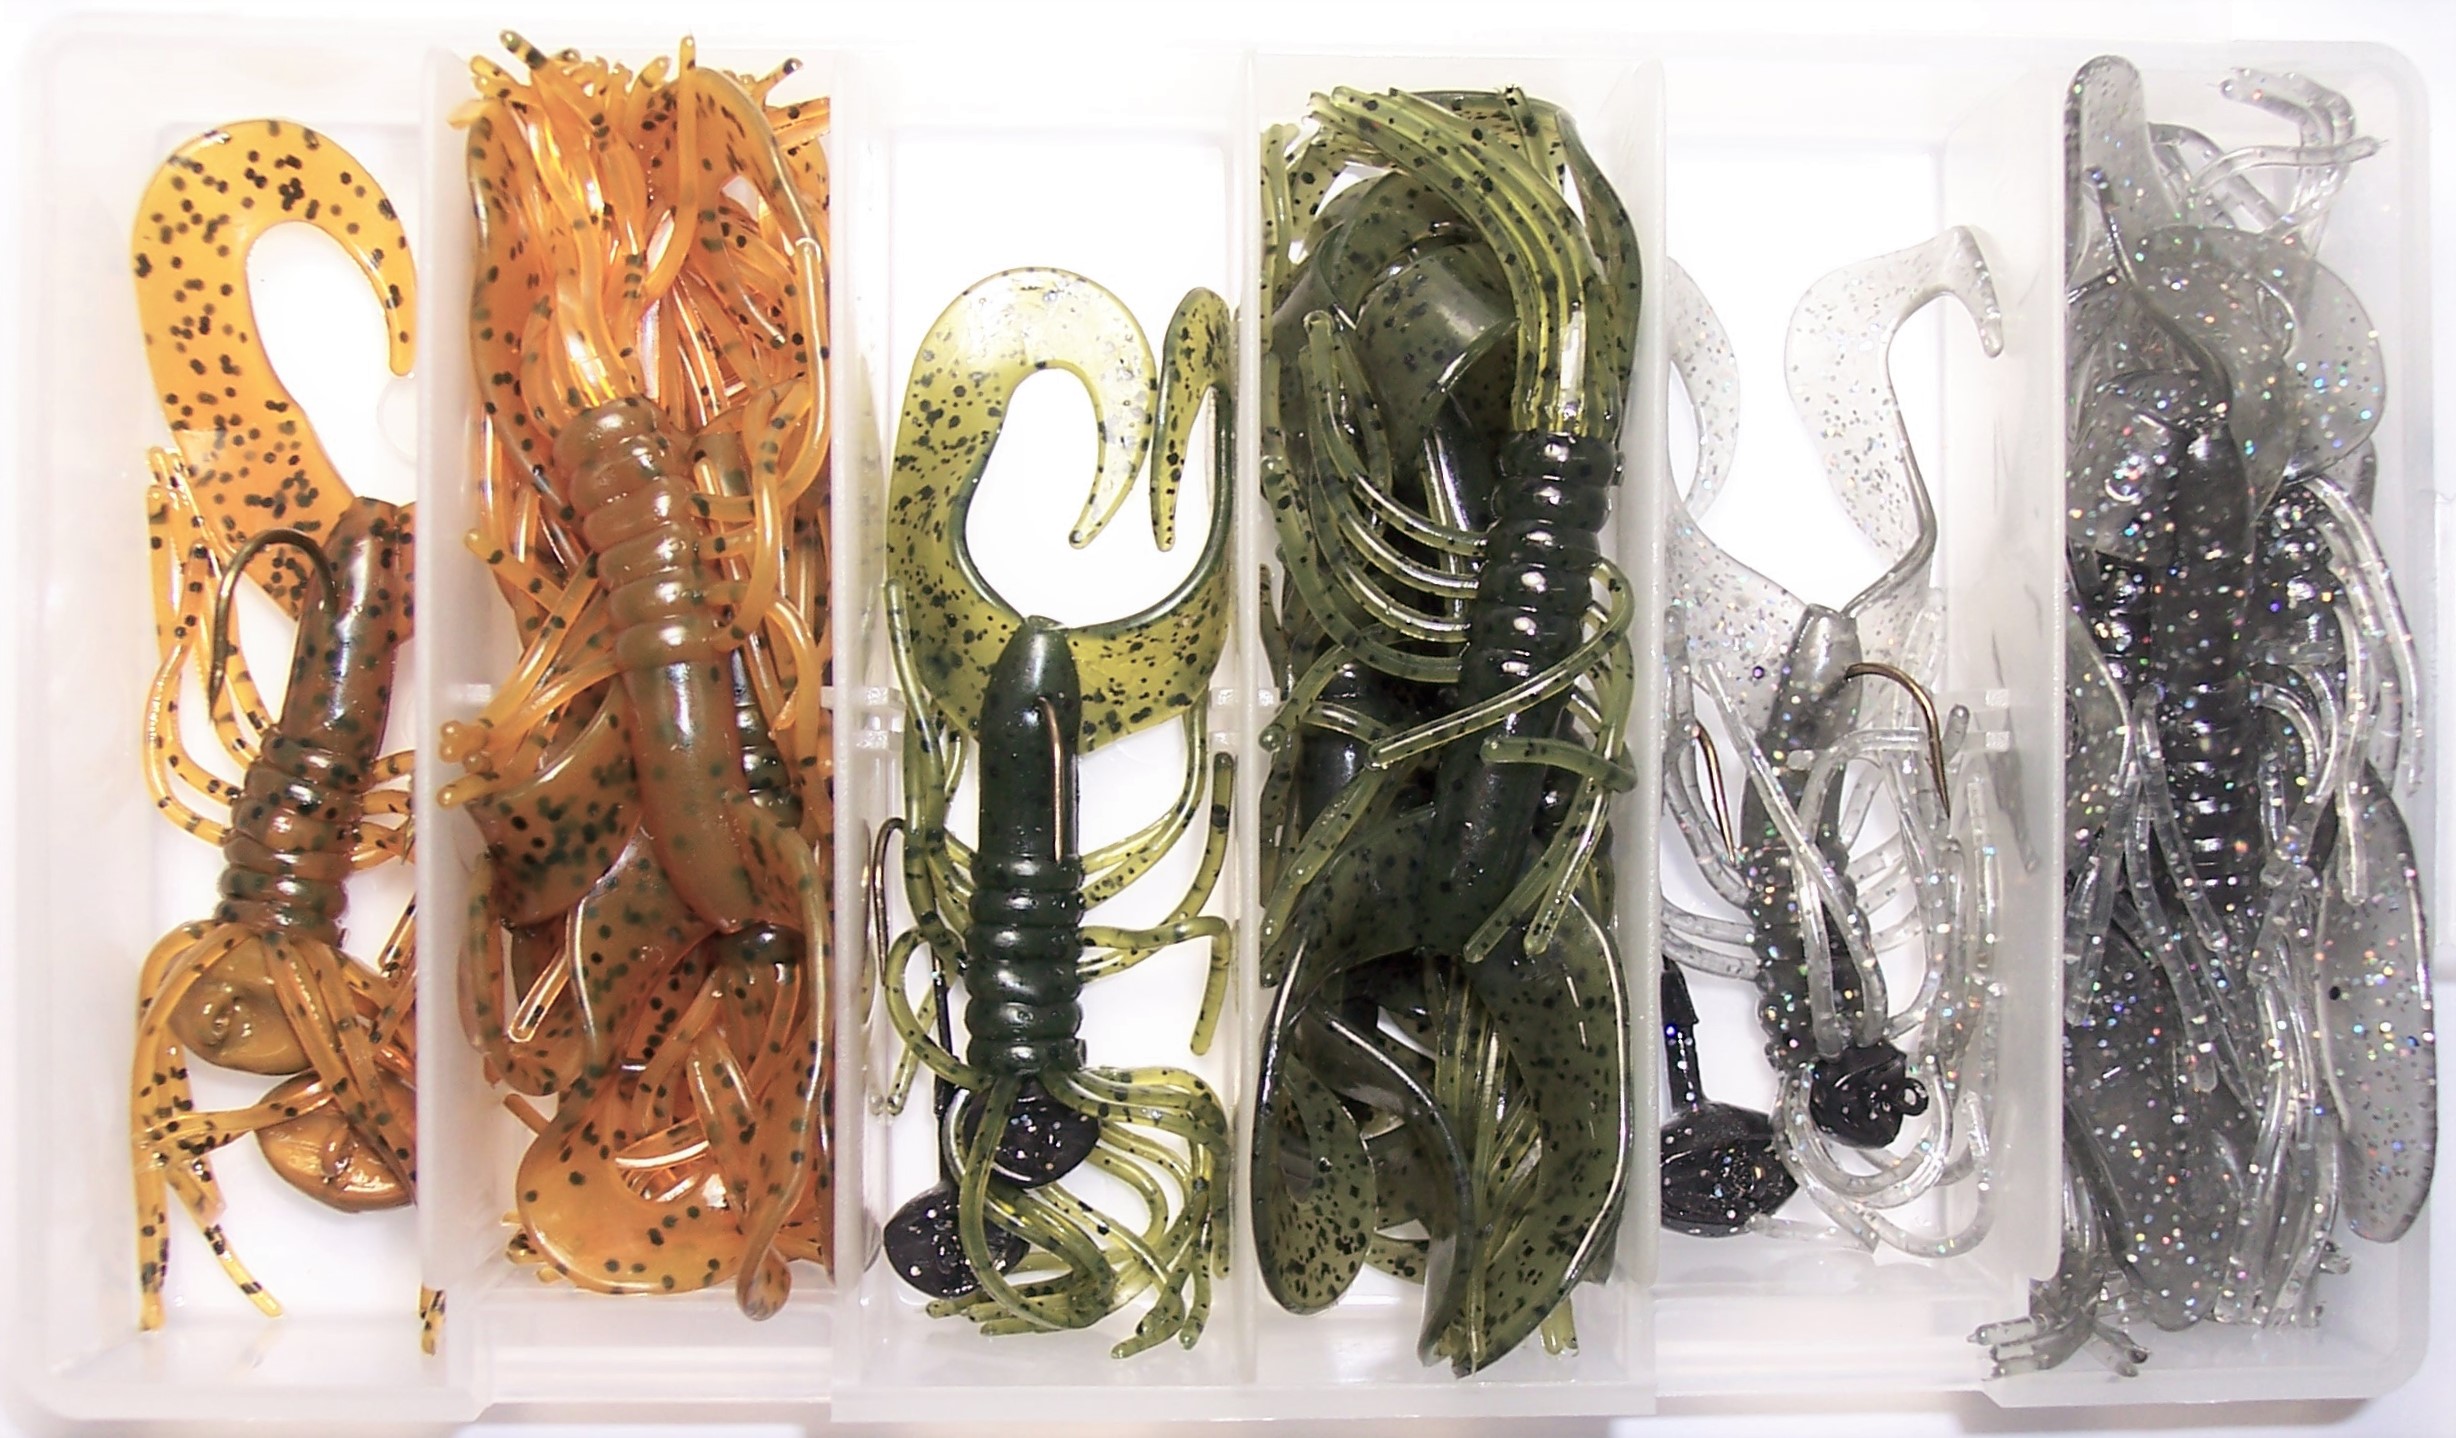 100 Assorted Spider Jigs 2 3/4 - Panfish Lot - 100 Qty - Soft